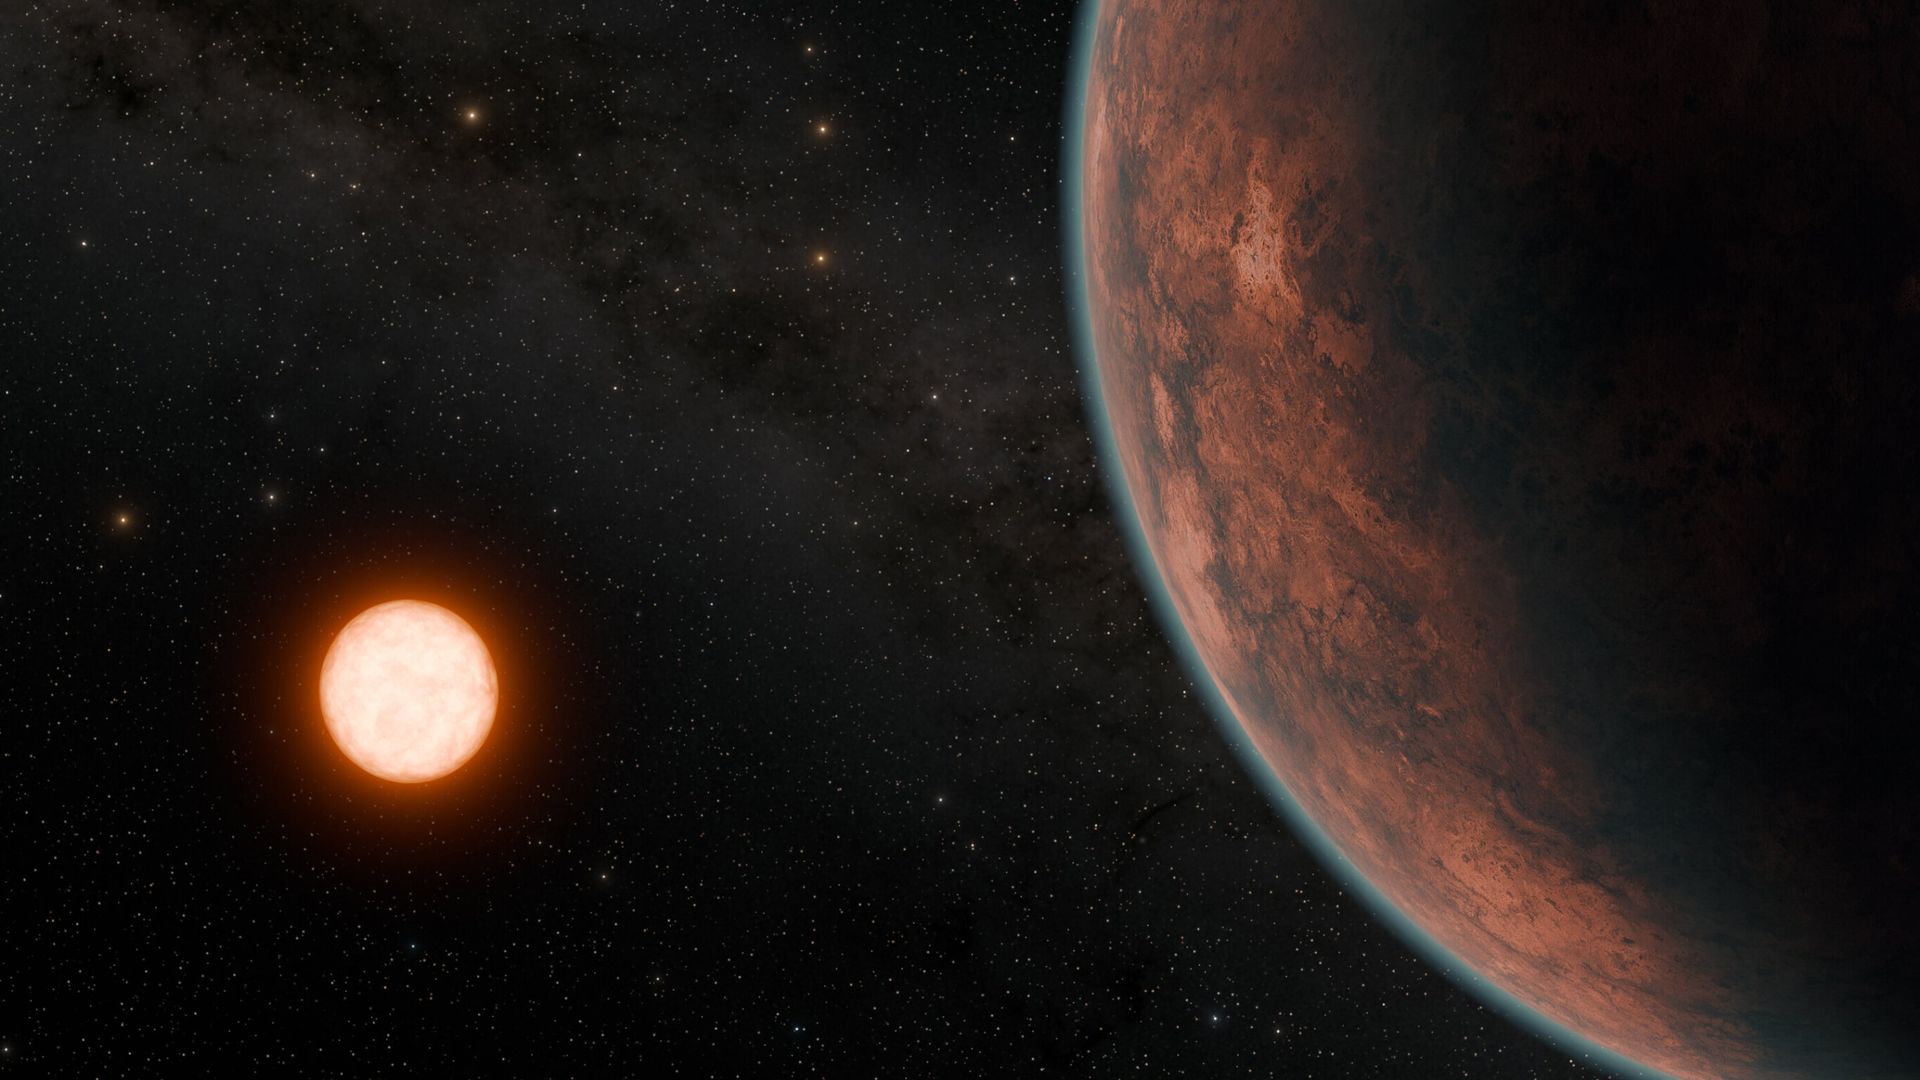 New planet that could support human life discovered 'close' to Earth by UK scientists